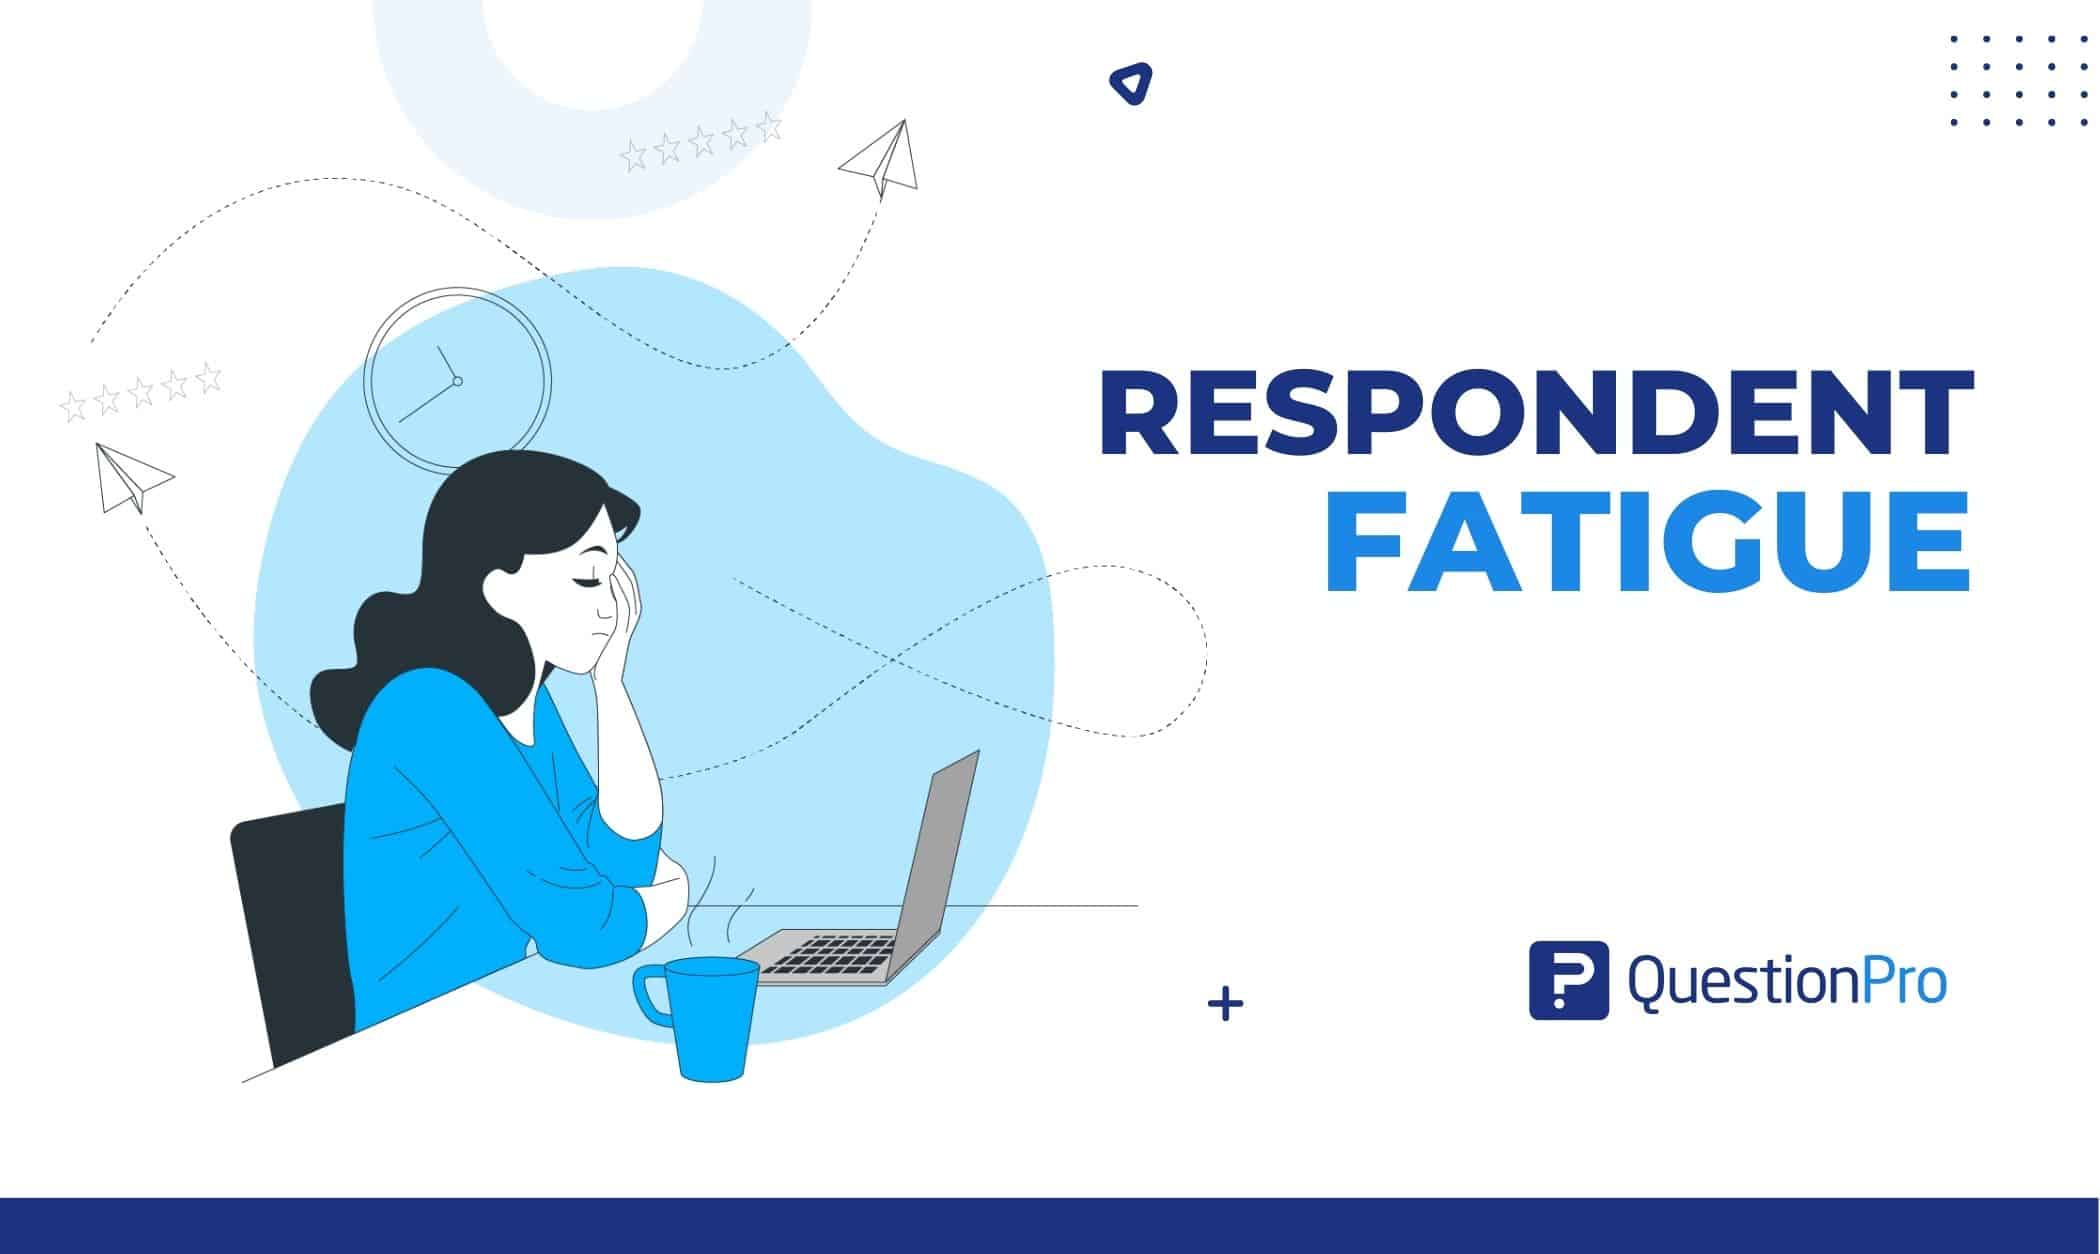 It's important to keep and measure customer happiness to know their satisfaction level. Let's discuss respondent fatigue in this article.